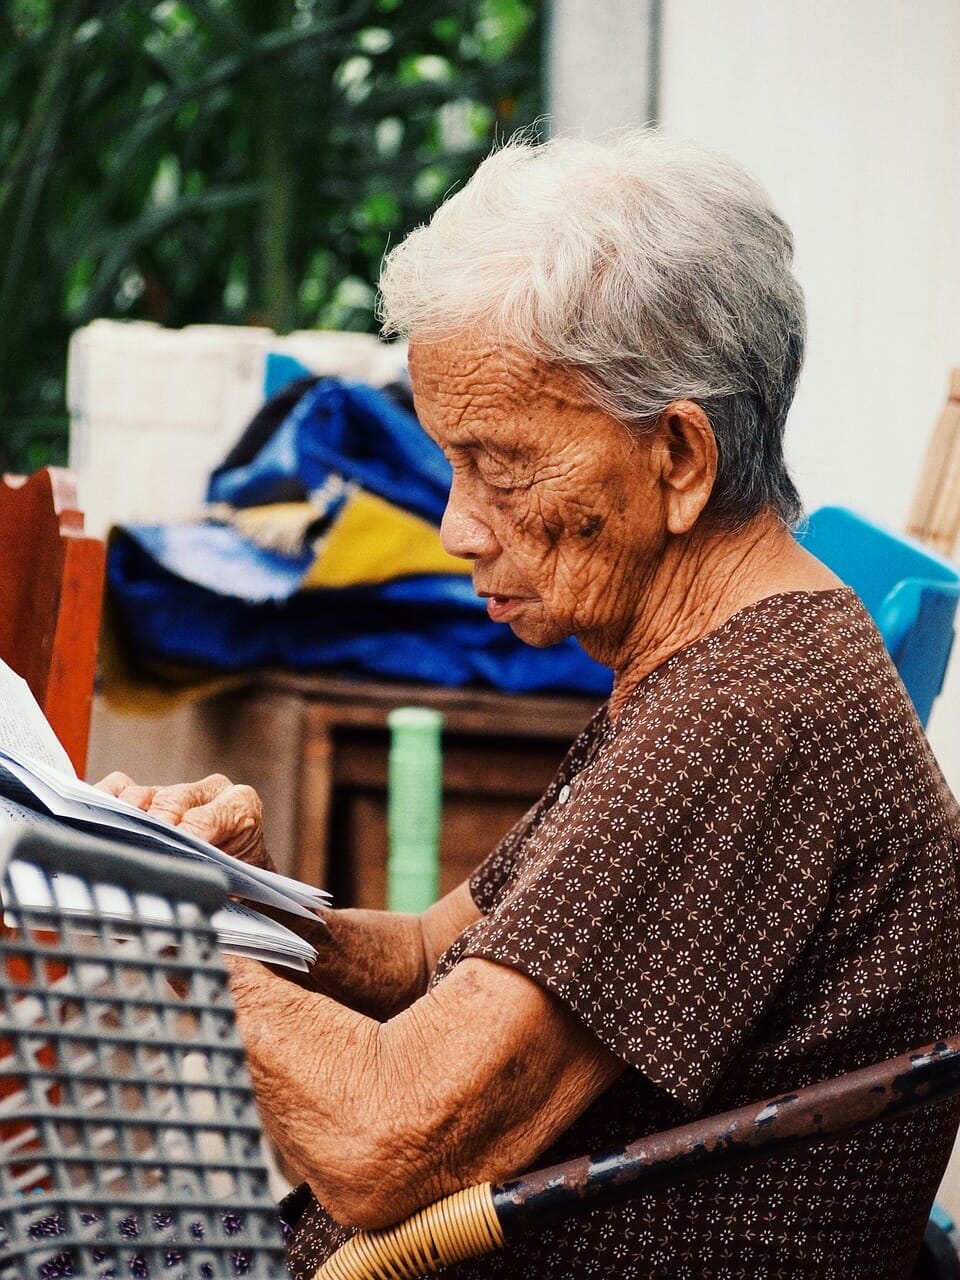 Concentrated Elderly Expat Reading Brochure Outside - Challenges and Solutions